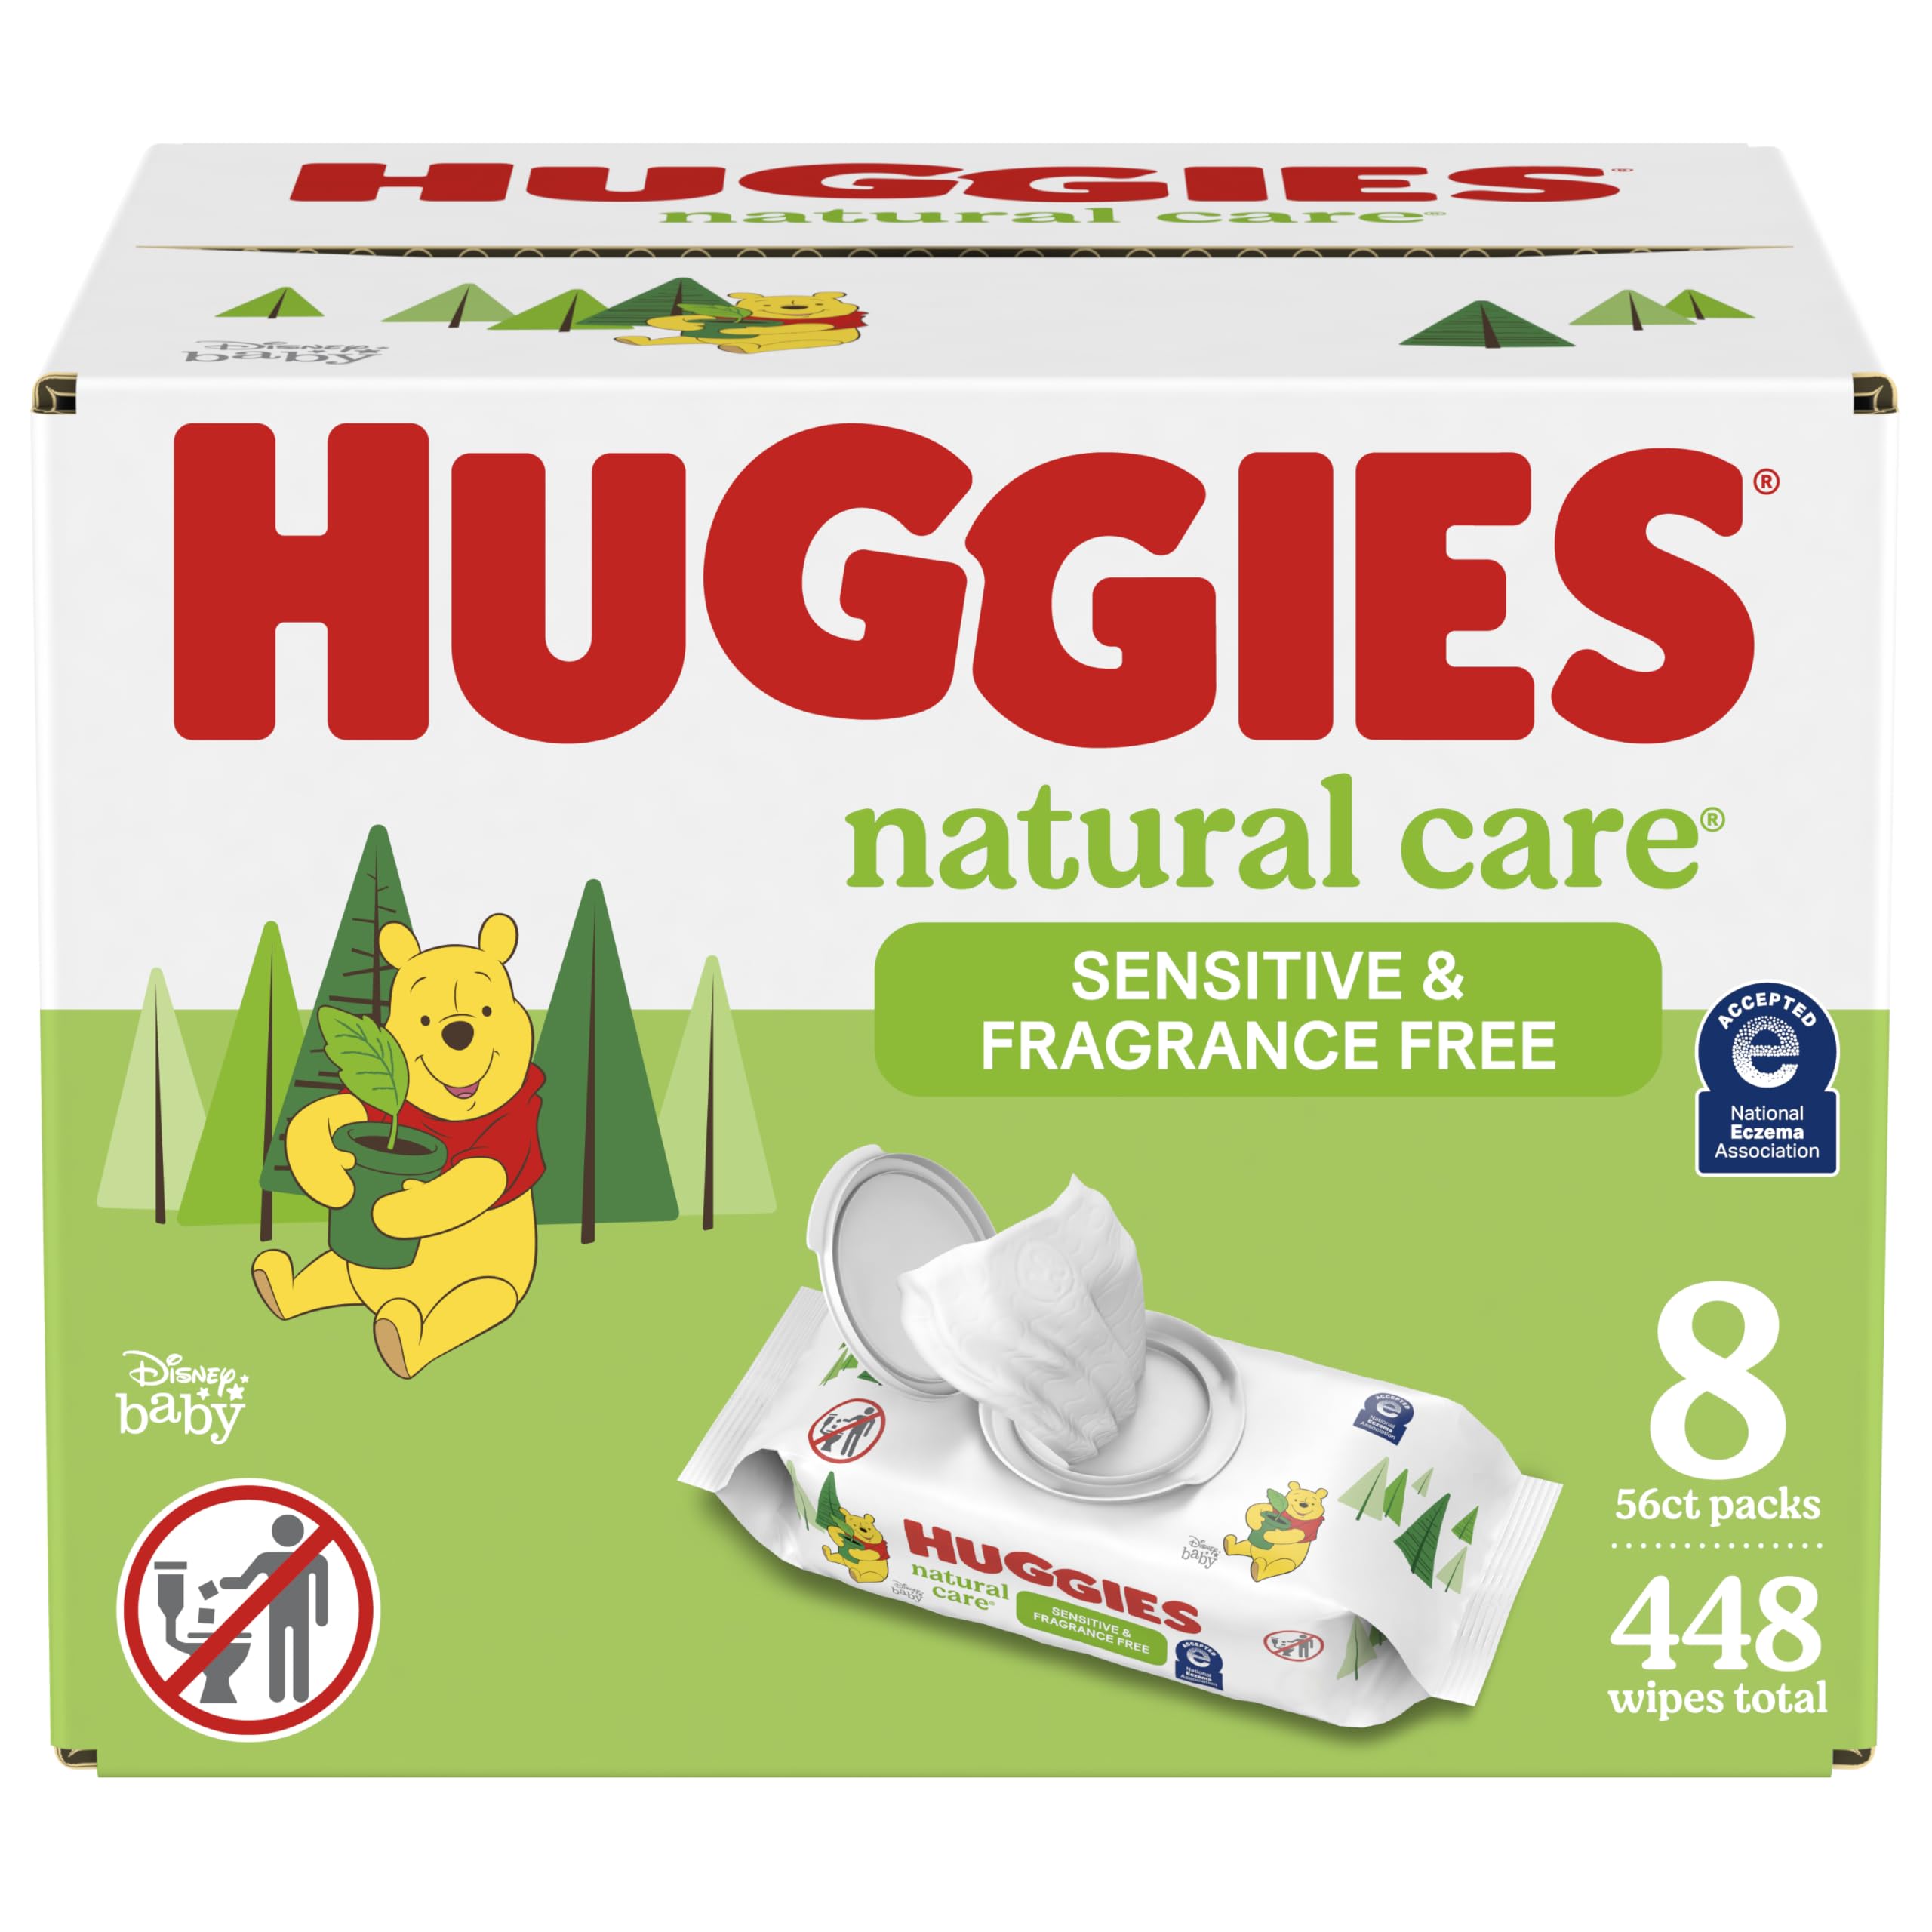 Huggies Natural Care Sensitive Baby Wipes, Unscented, Hypoallergenic, 99% Purified Water, 8 Flip-Top Packs (448 Wipes Total) [Subscribe & Save] $11.64